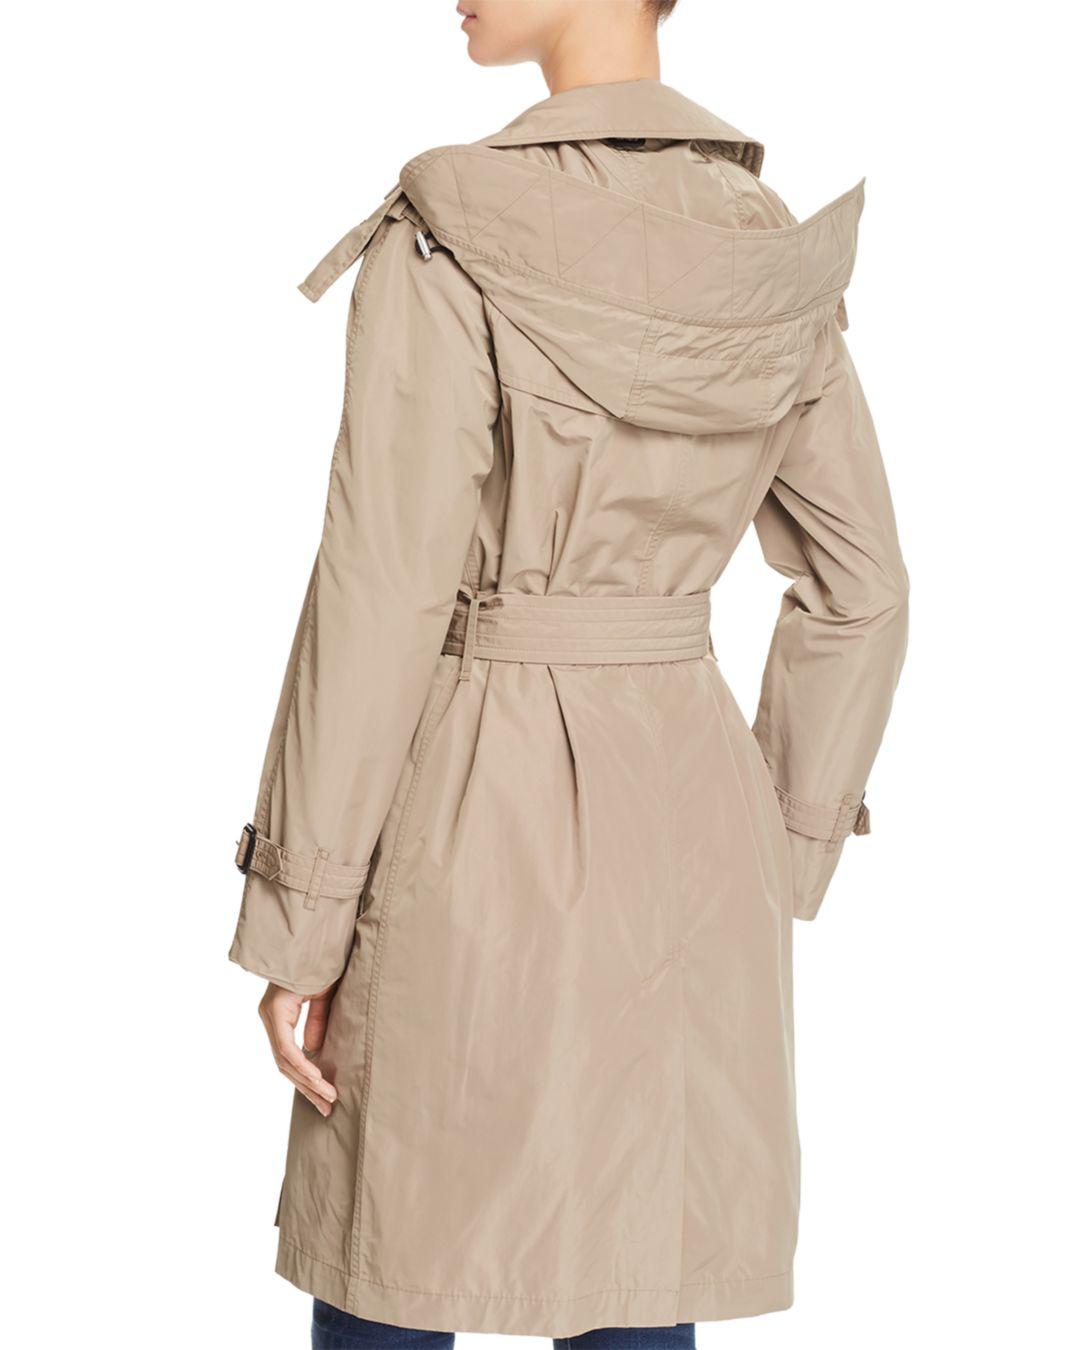 Burberry Sisal Trench Coat in Natural - Lyst